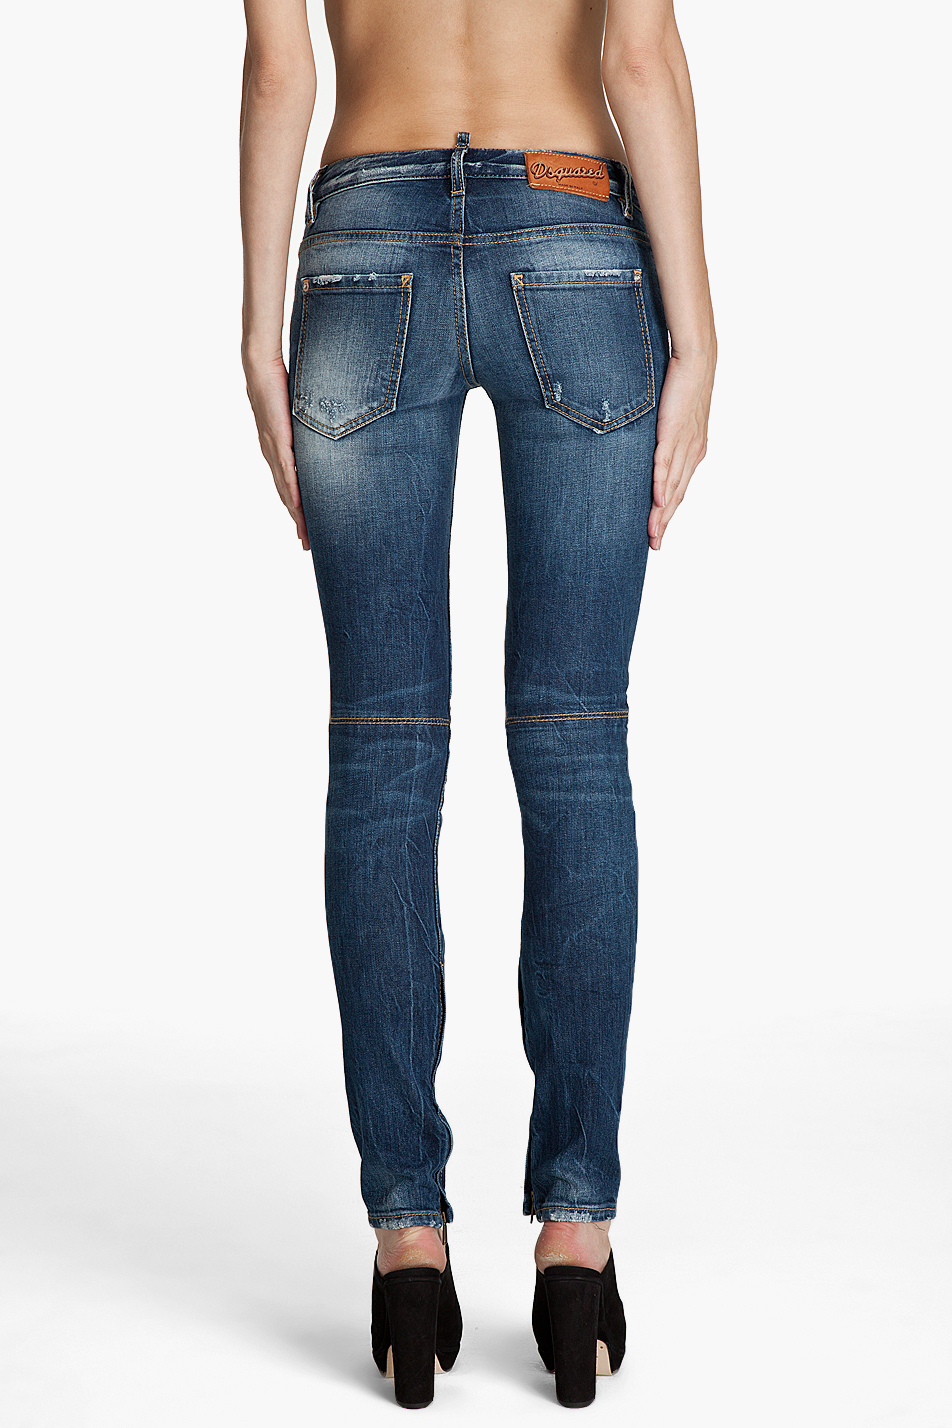 Lyst - Dsquared² Super Skinny Low Rise Jeans in Blue